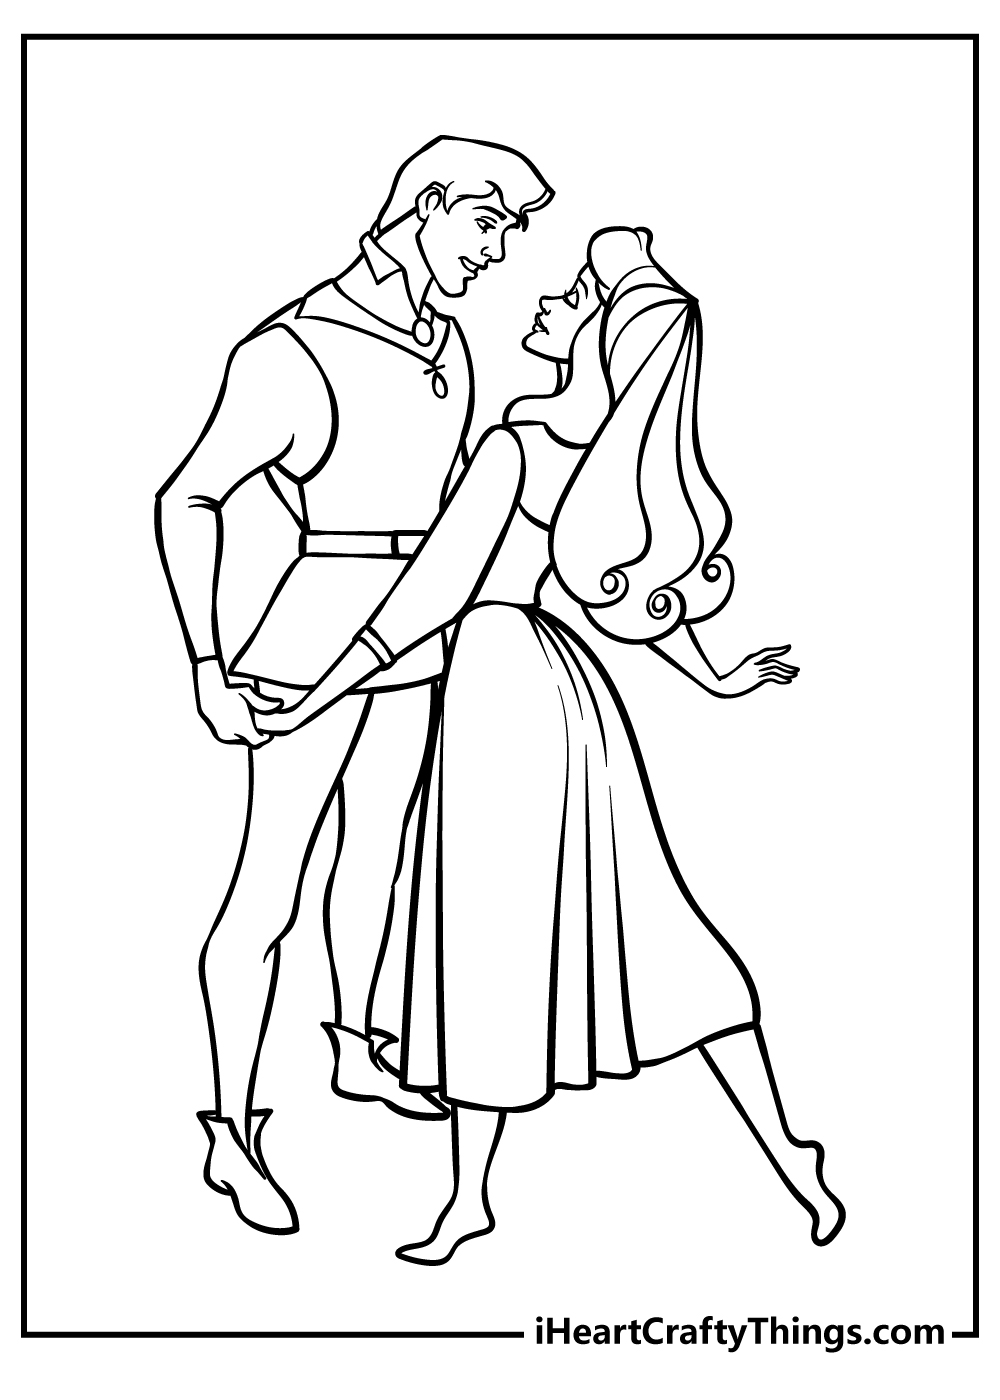 Printable Sleeping Beauty Coloring Pages Updated 20